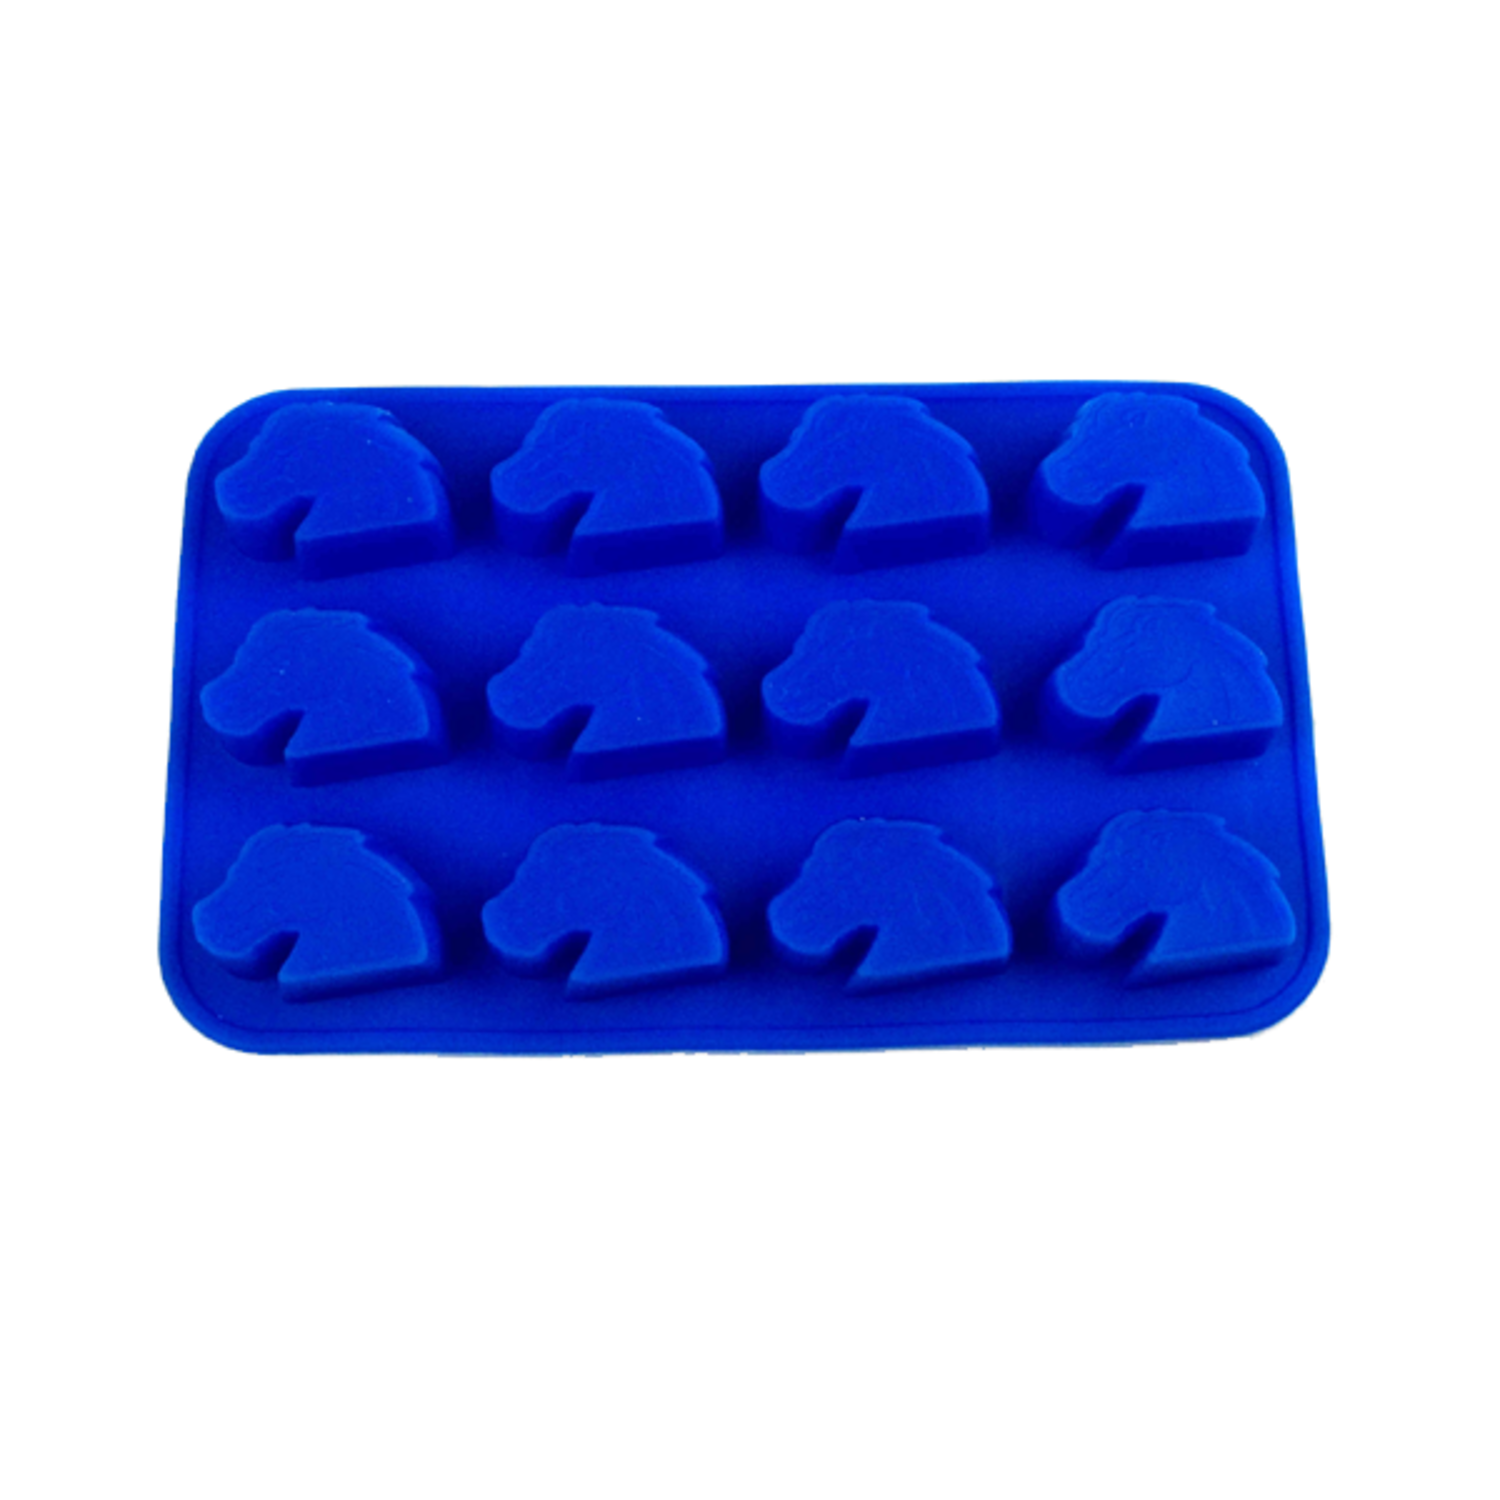 Boise State Broncos Ice Cube Tray